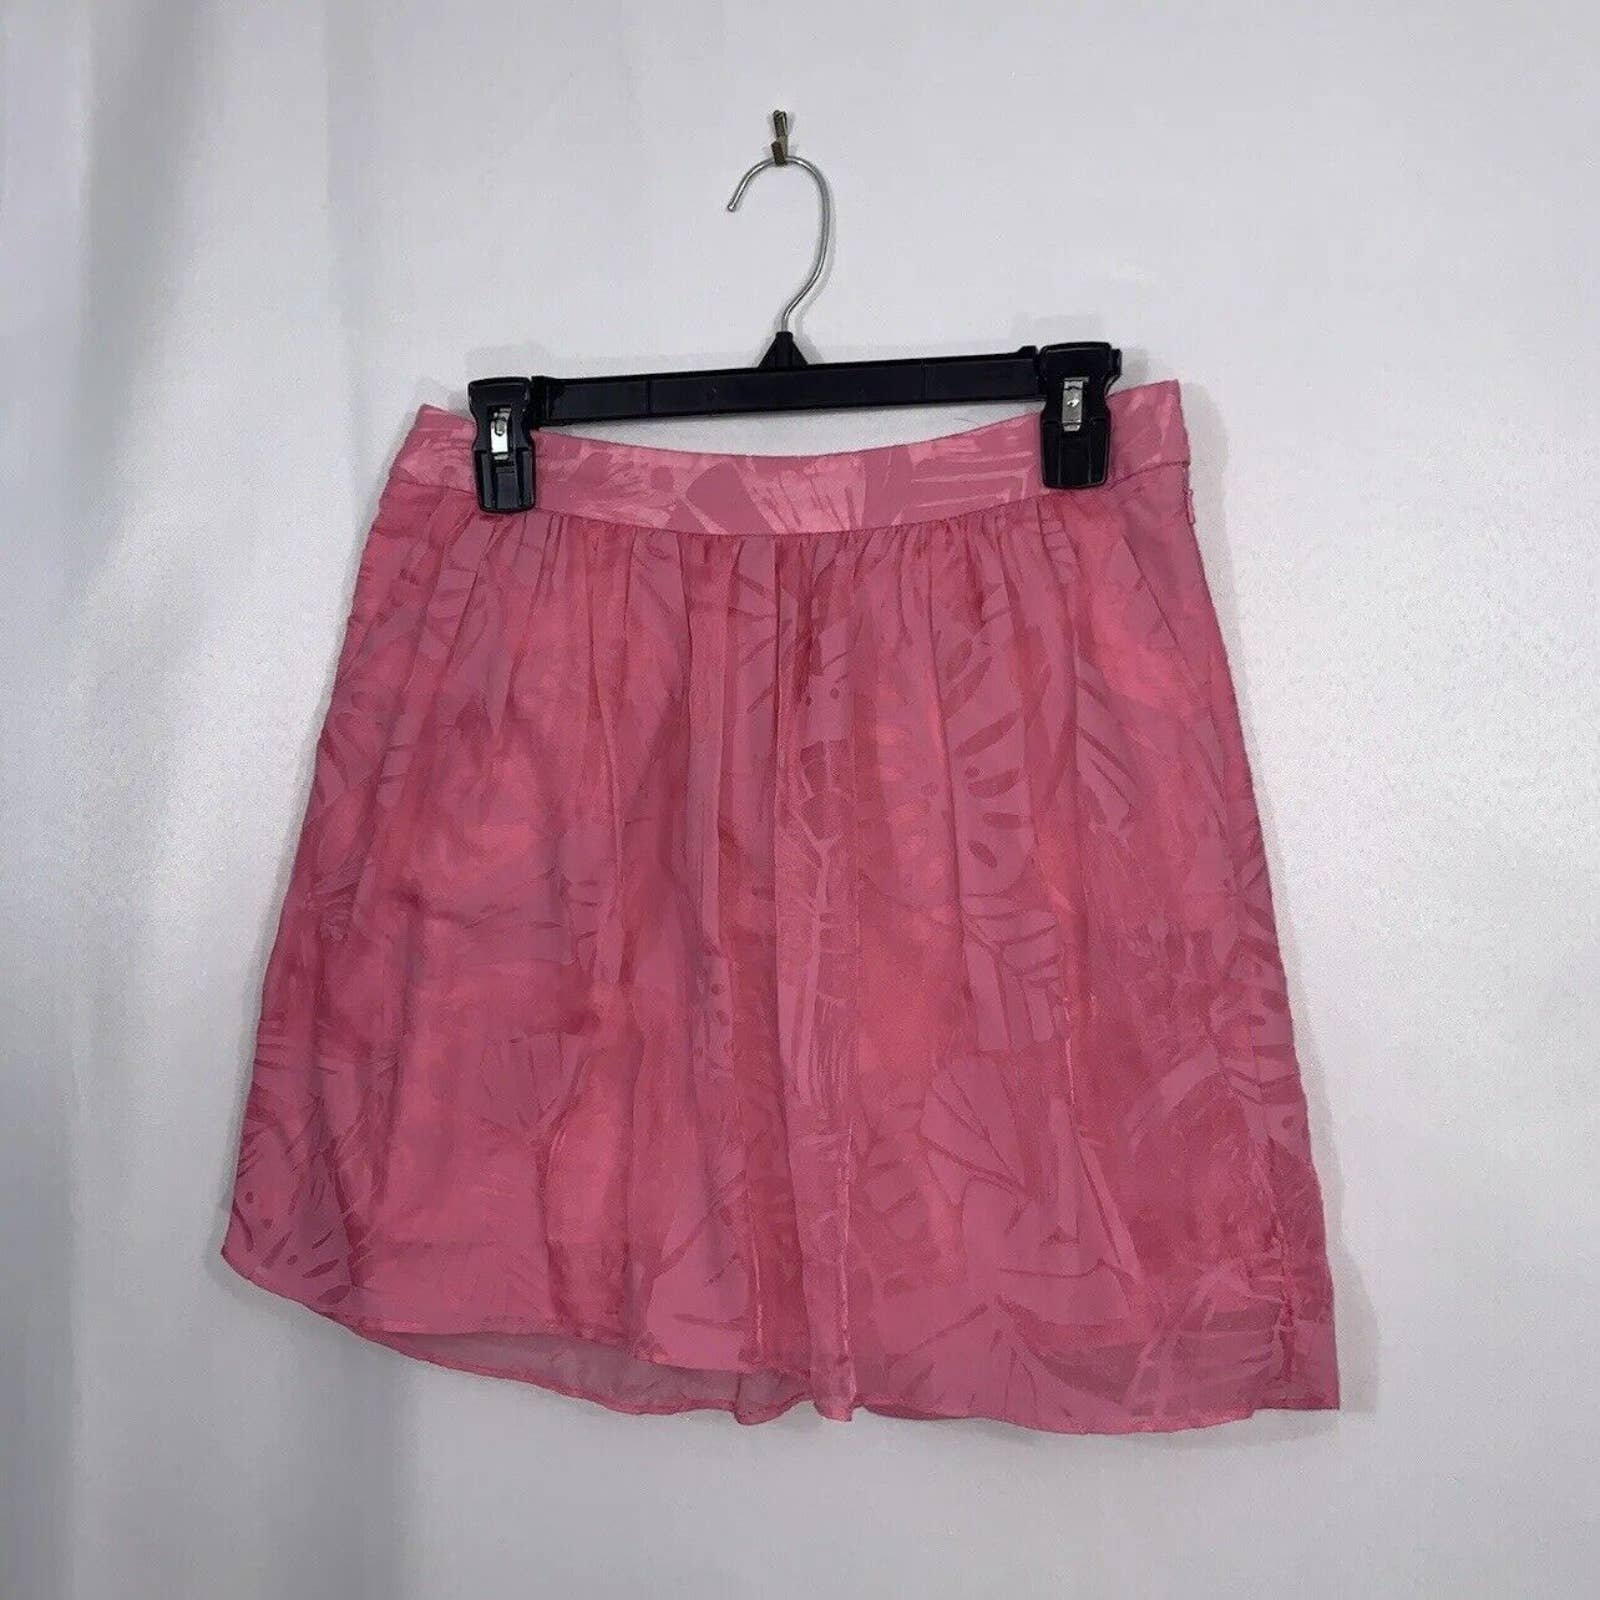 Nice Lilly Pulitzer Women´s Whitley Burnout Floral Print Skirt Pink Size 4 FL3PCi8Q2 Low Price